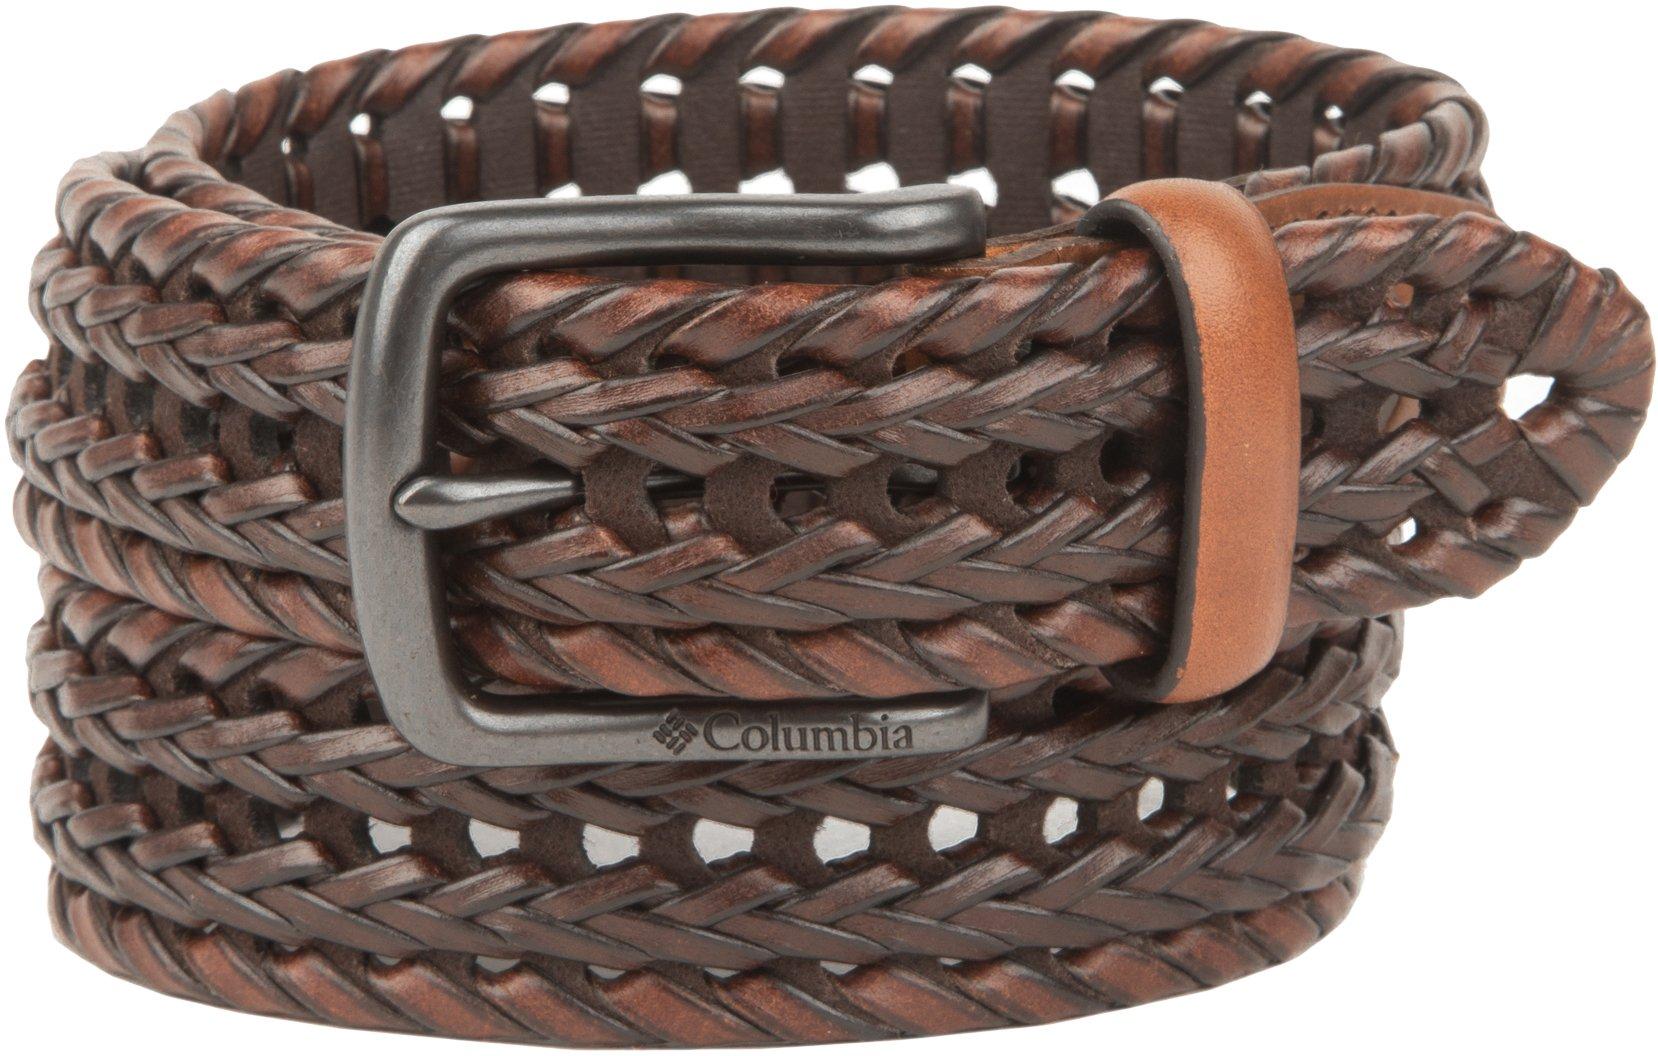 Tommy Hilfiger Mens Leather Braided Belt - Tan Brown - X-Large